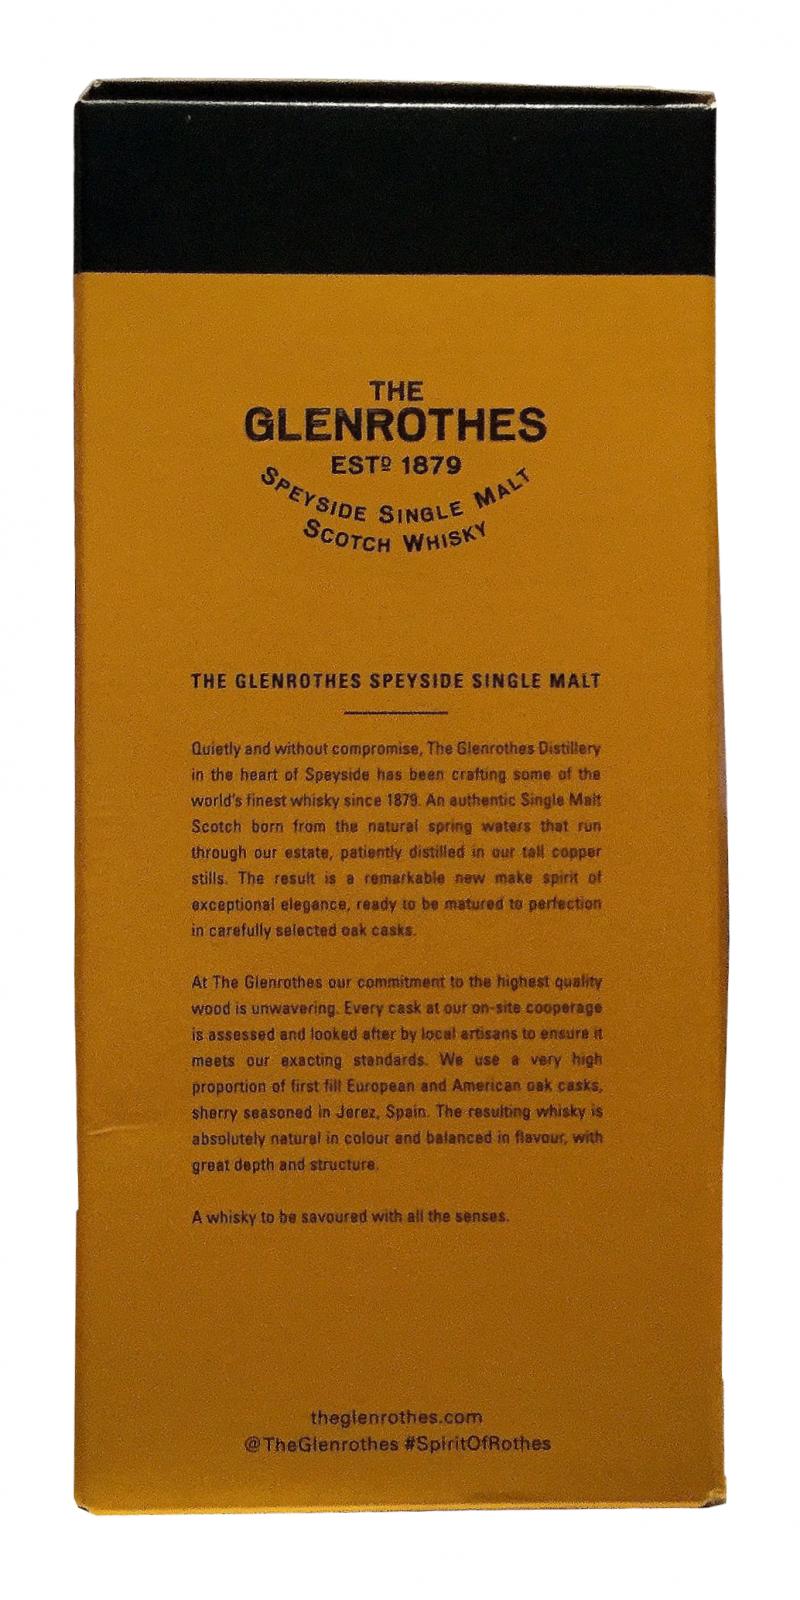 Glenrothes 10-year-old